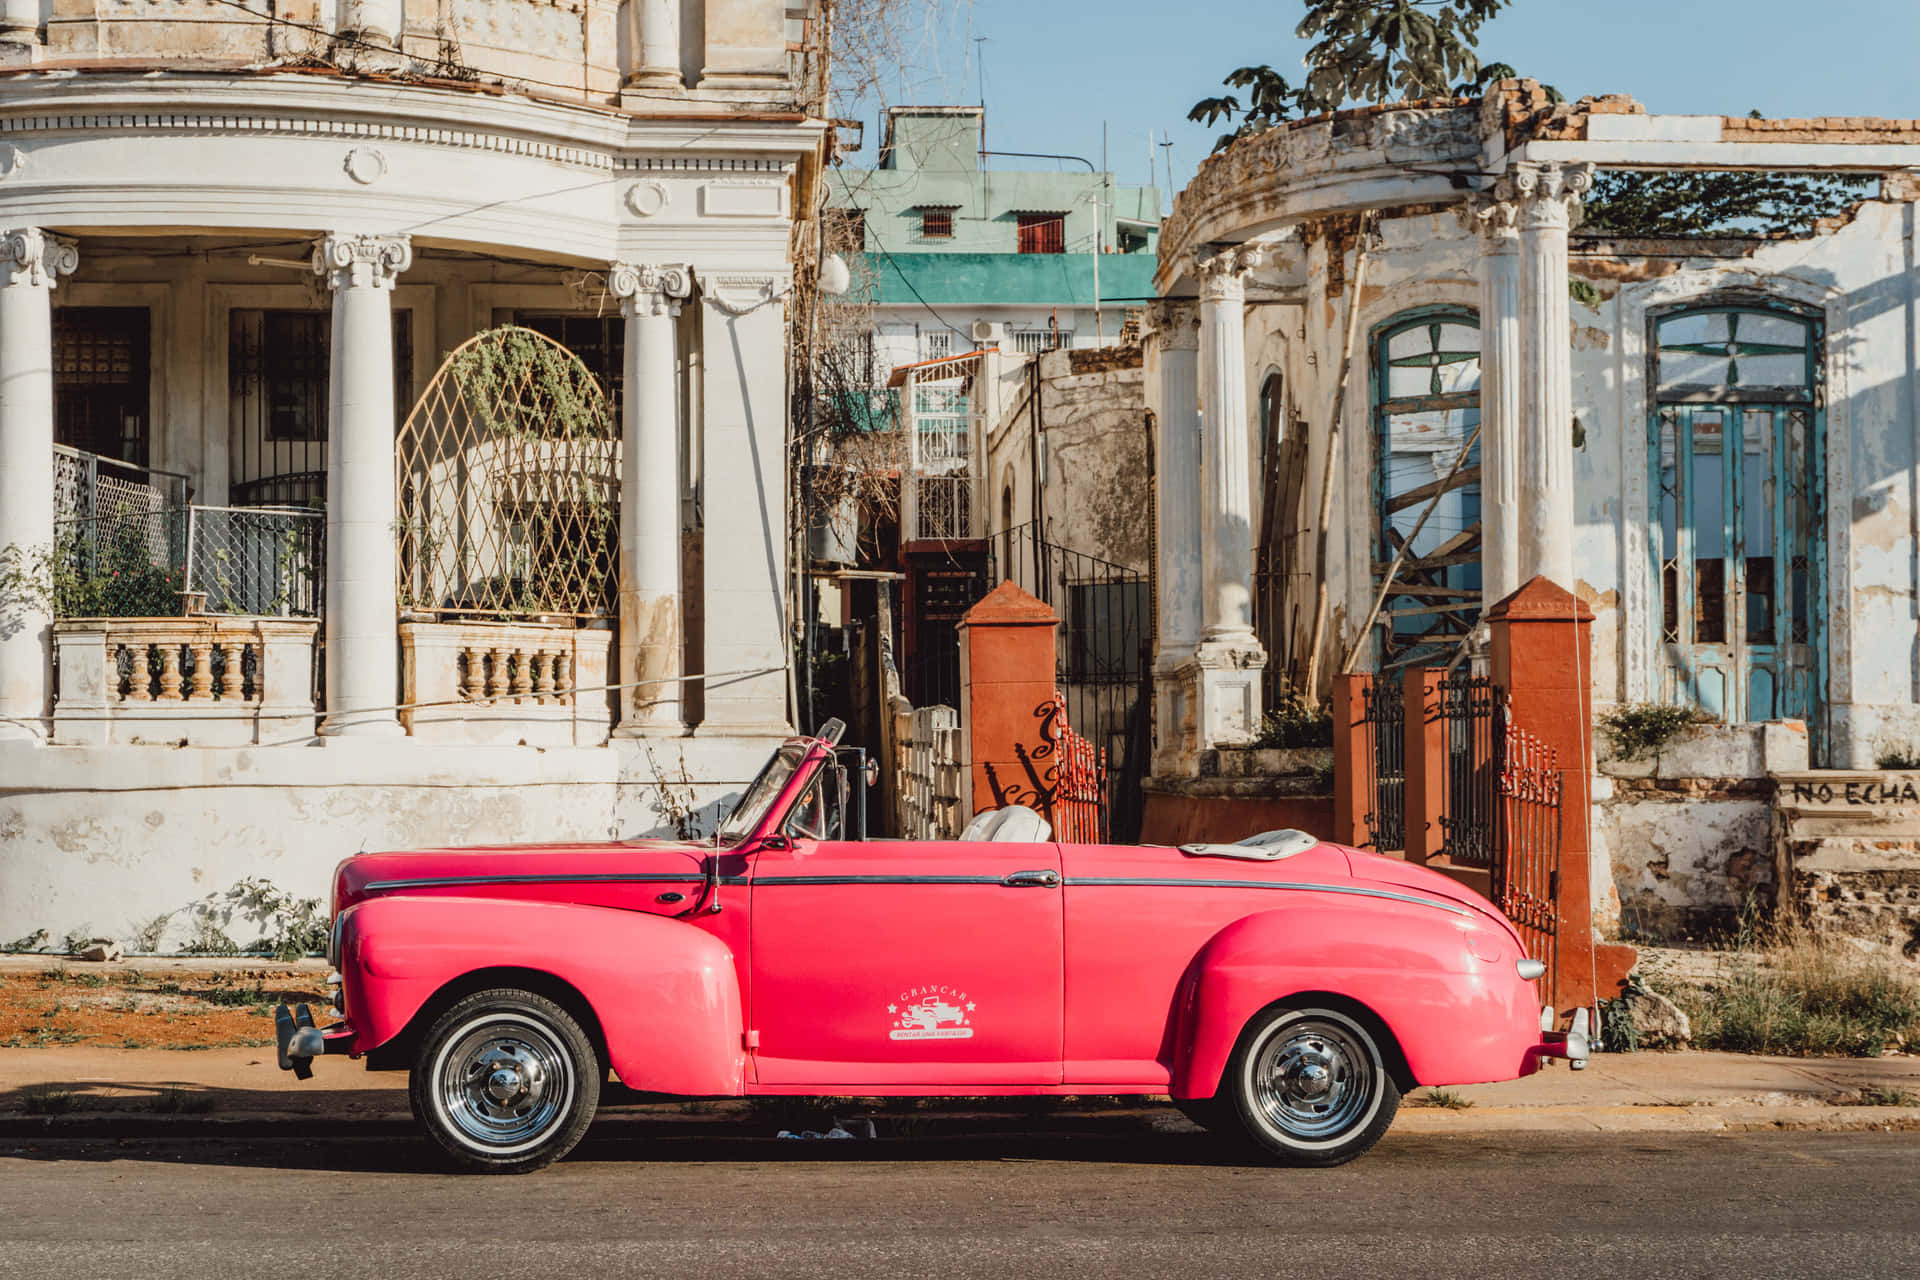 Retro and Stylish - A Breathtaking Pink Vintage Car Wallpaper